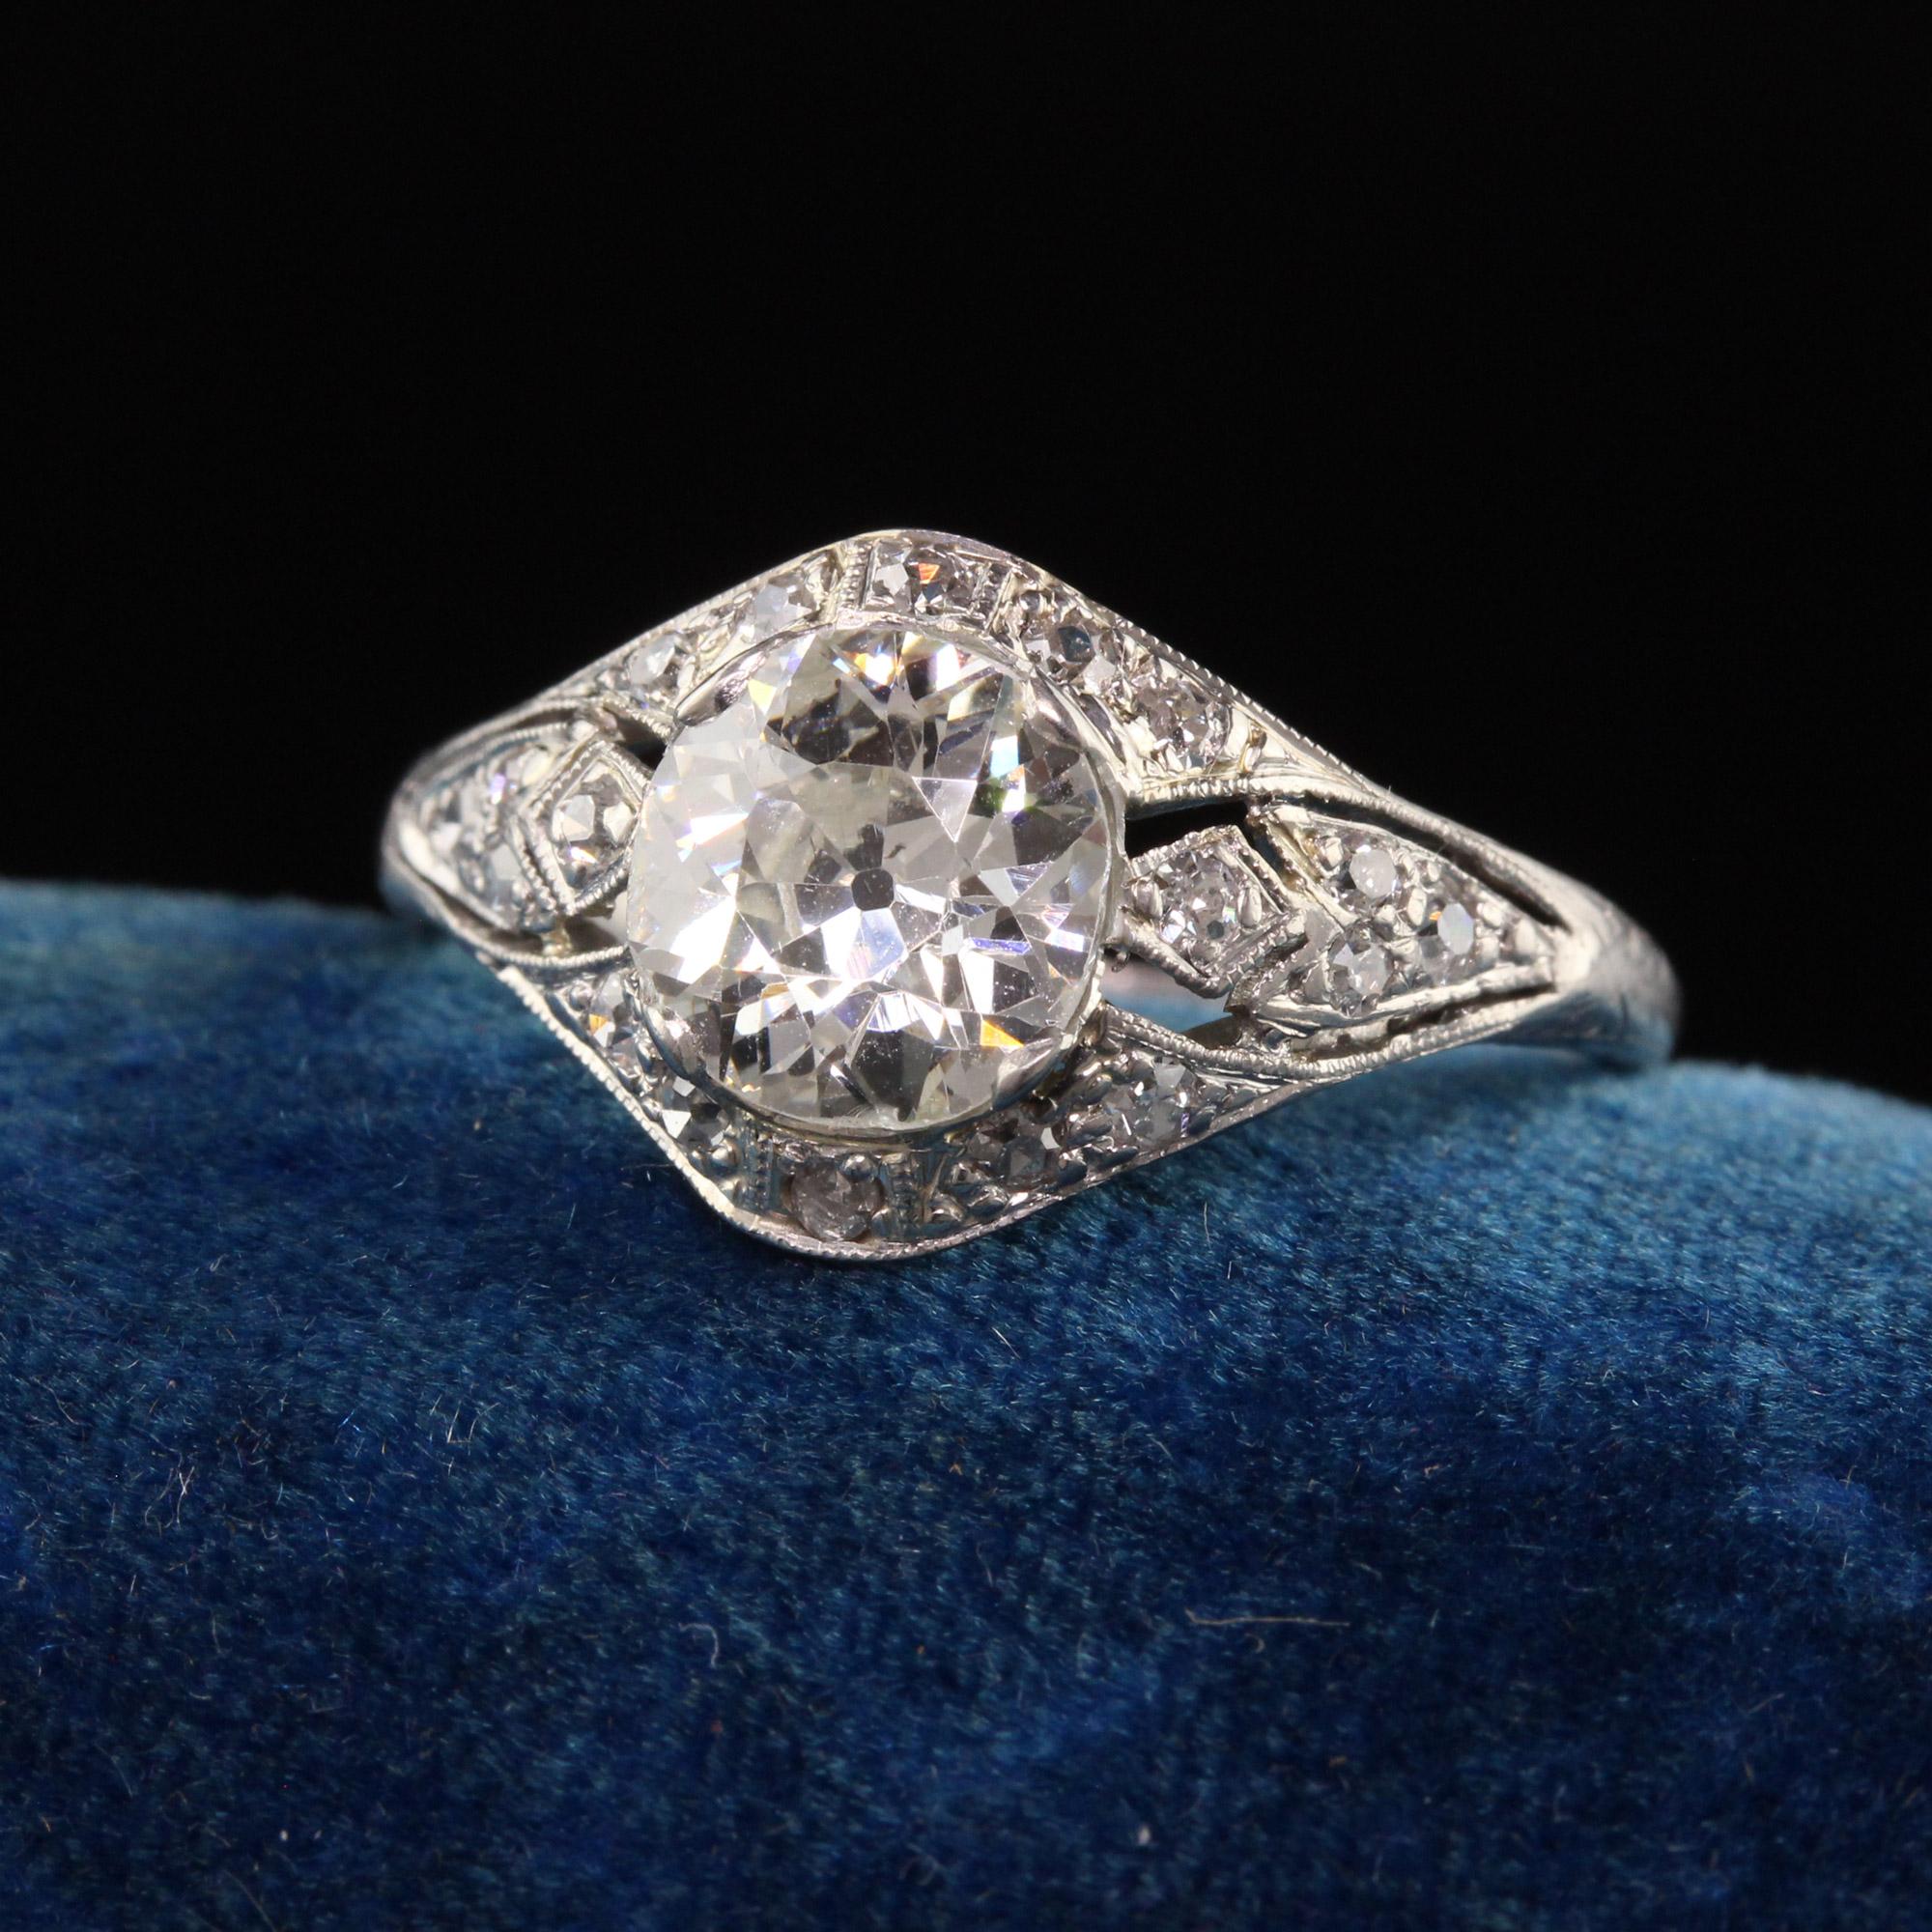 Beautiful Antique Edwardian Platinum Old European Diamond Filigree Engagement Ring. This beautiful ring is crafted in platinum. The center holds a beautiful old european cut diamond in a pretty art deco filigree mounting. The ring is low on the